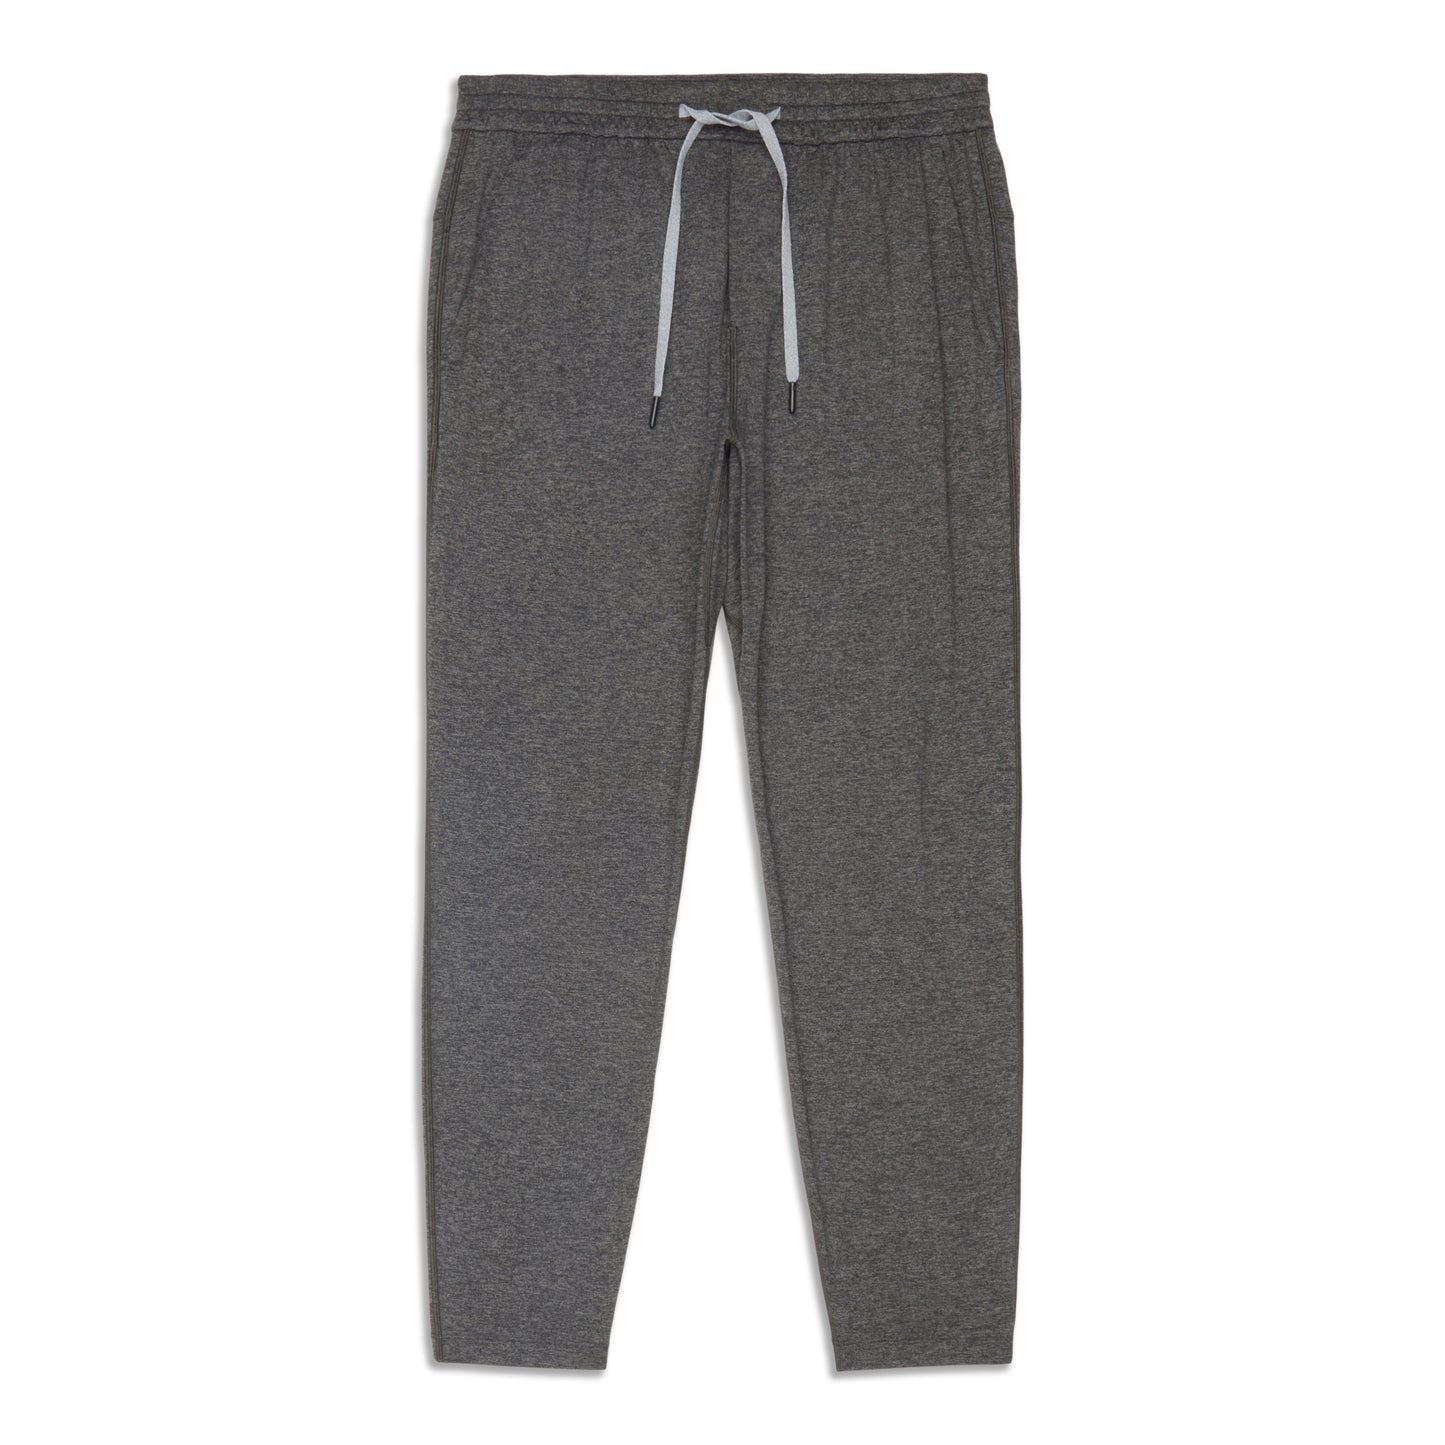 Soft Jersey Tapered Pant - Resale